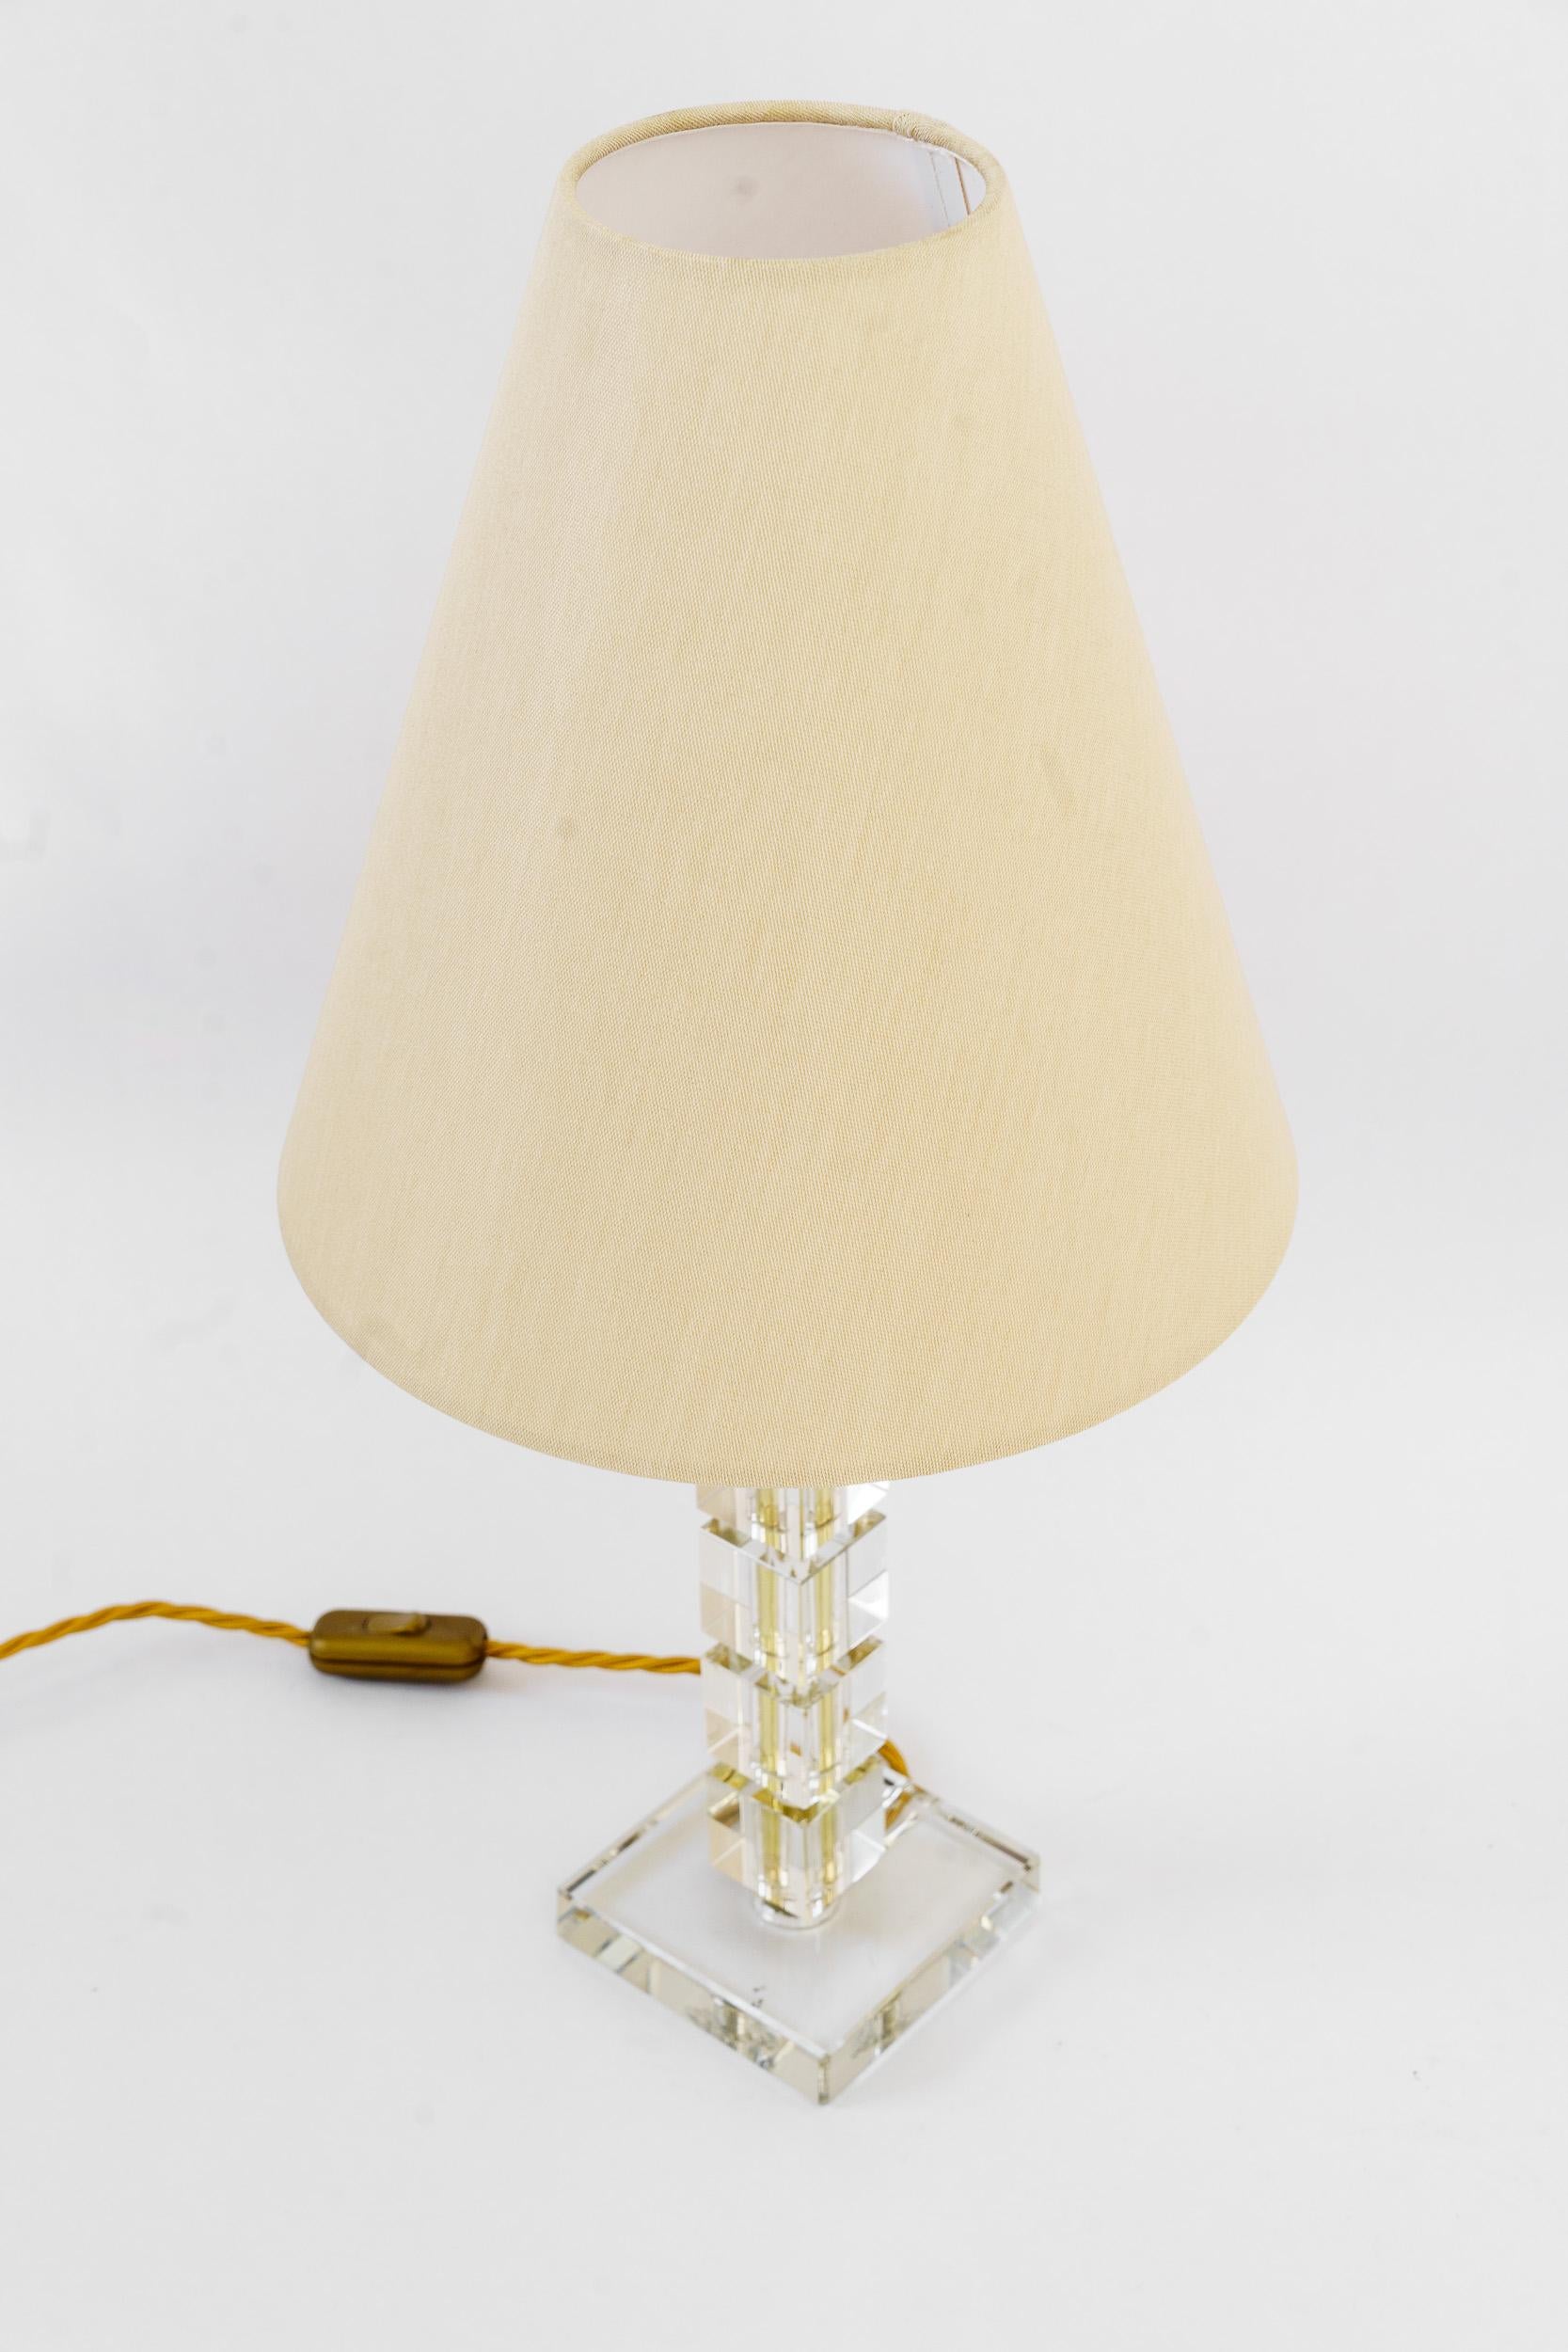 Big Bakalowits glass table lamp with fabric shade vienna around 1920s In Good Condition For Sale In Wien, AT